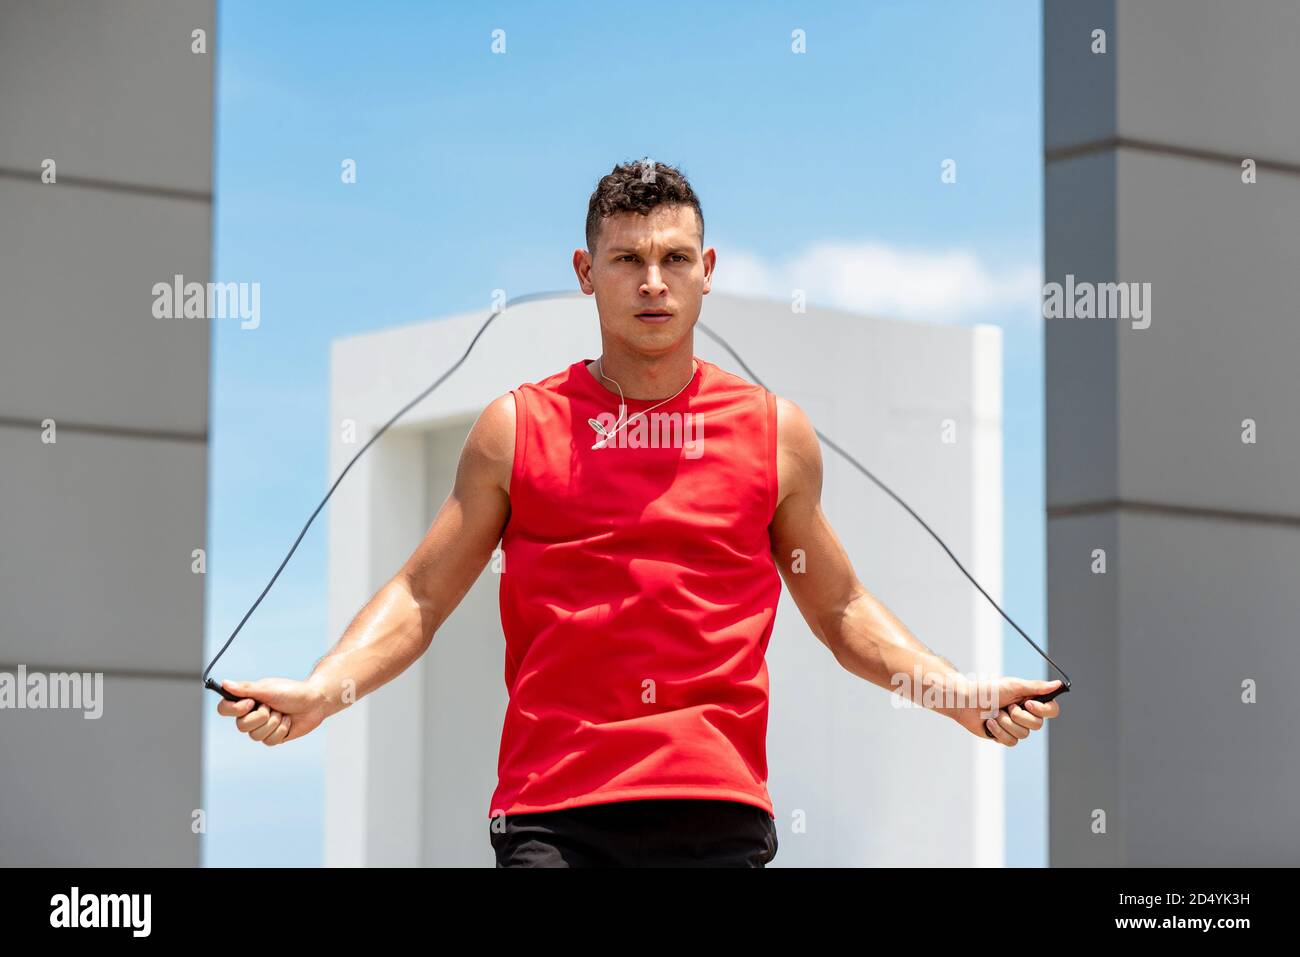 Handsome fit Caucasian athlete doing jump rope for daily morning cardio exercise on building rooftop Stock Photo